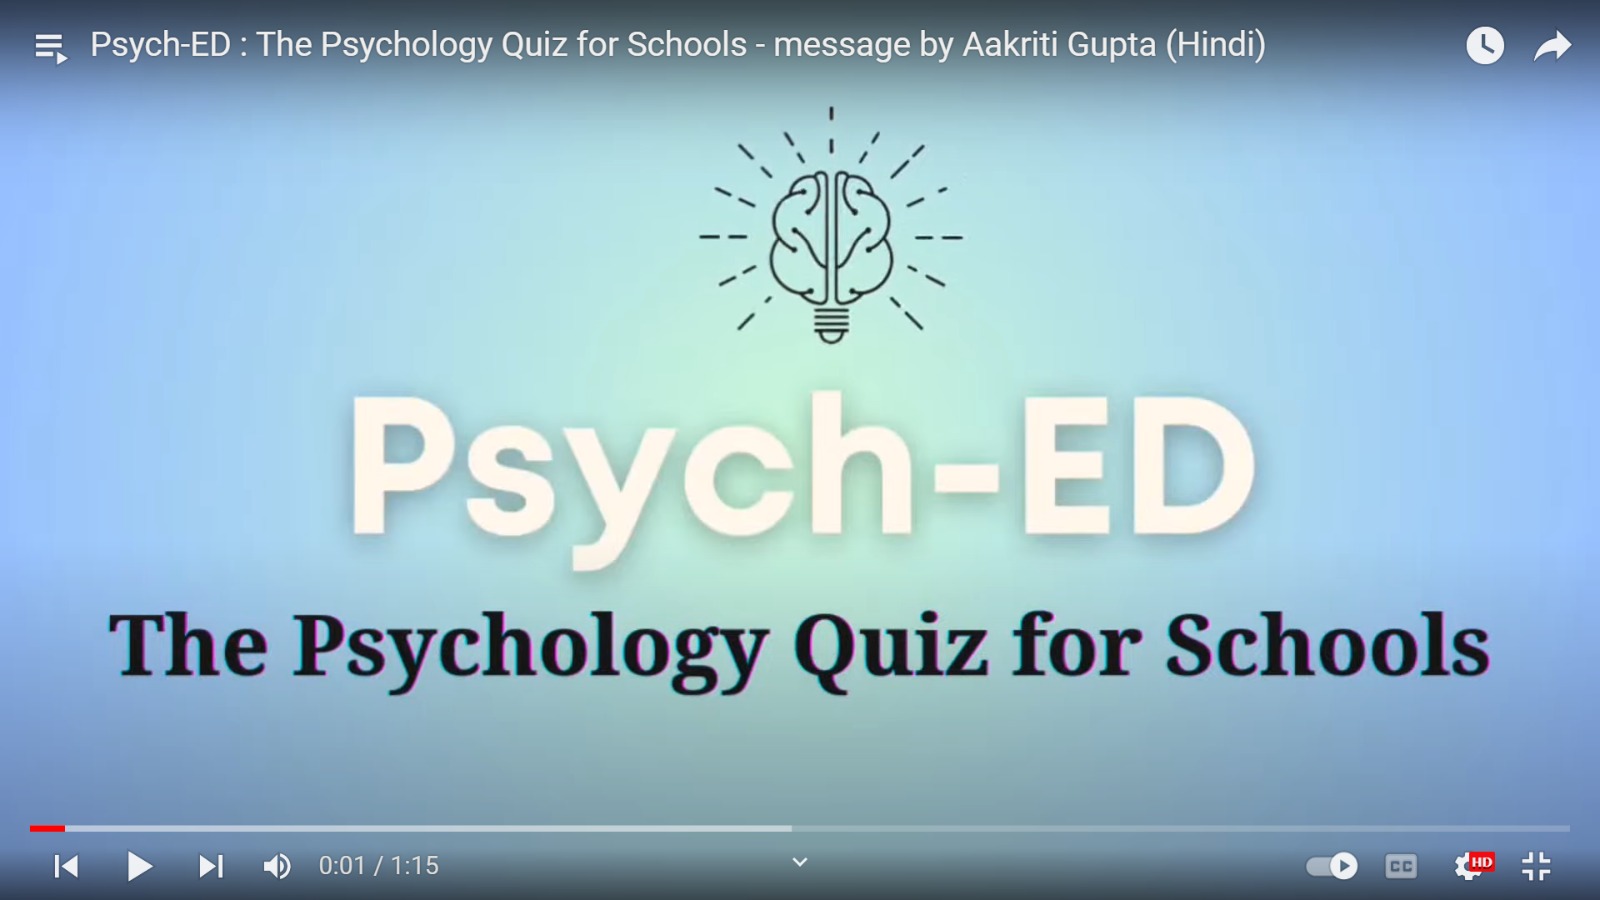 Psych-ED : The Psychology Quiz for Schools - message by Aakriti Gupta (Hindi)